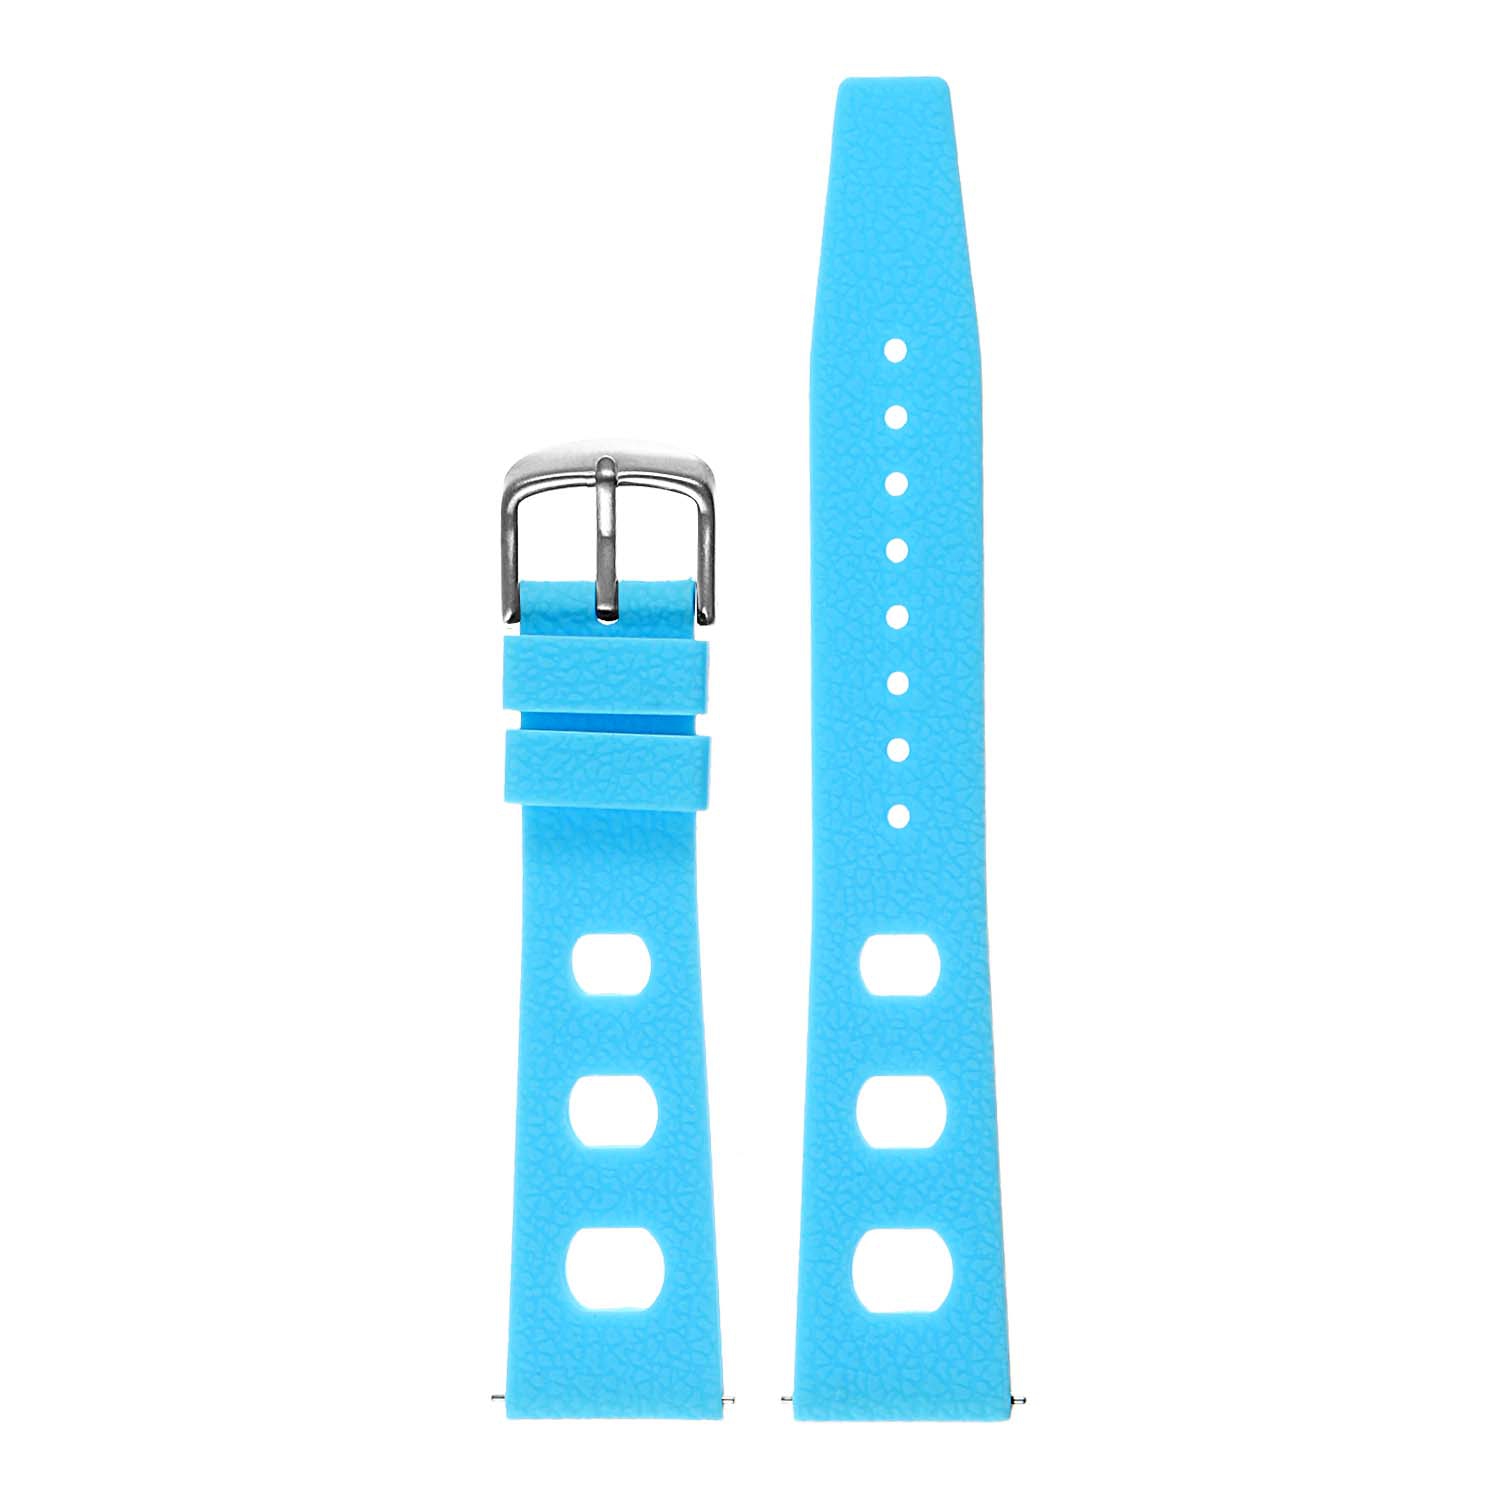 StrapsCo Vintage Style Rubber Rally Watch Band Strap for Samsung Galaxy Watch 3 - 22mm - For 45mm Galaxy Watch3 - Light Blue